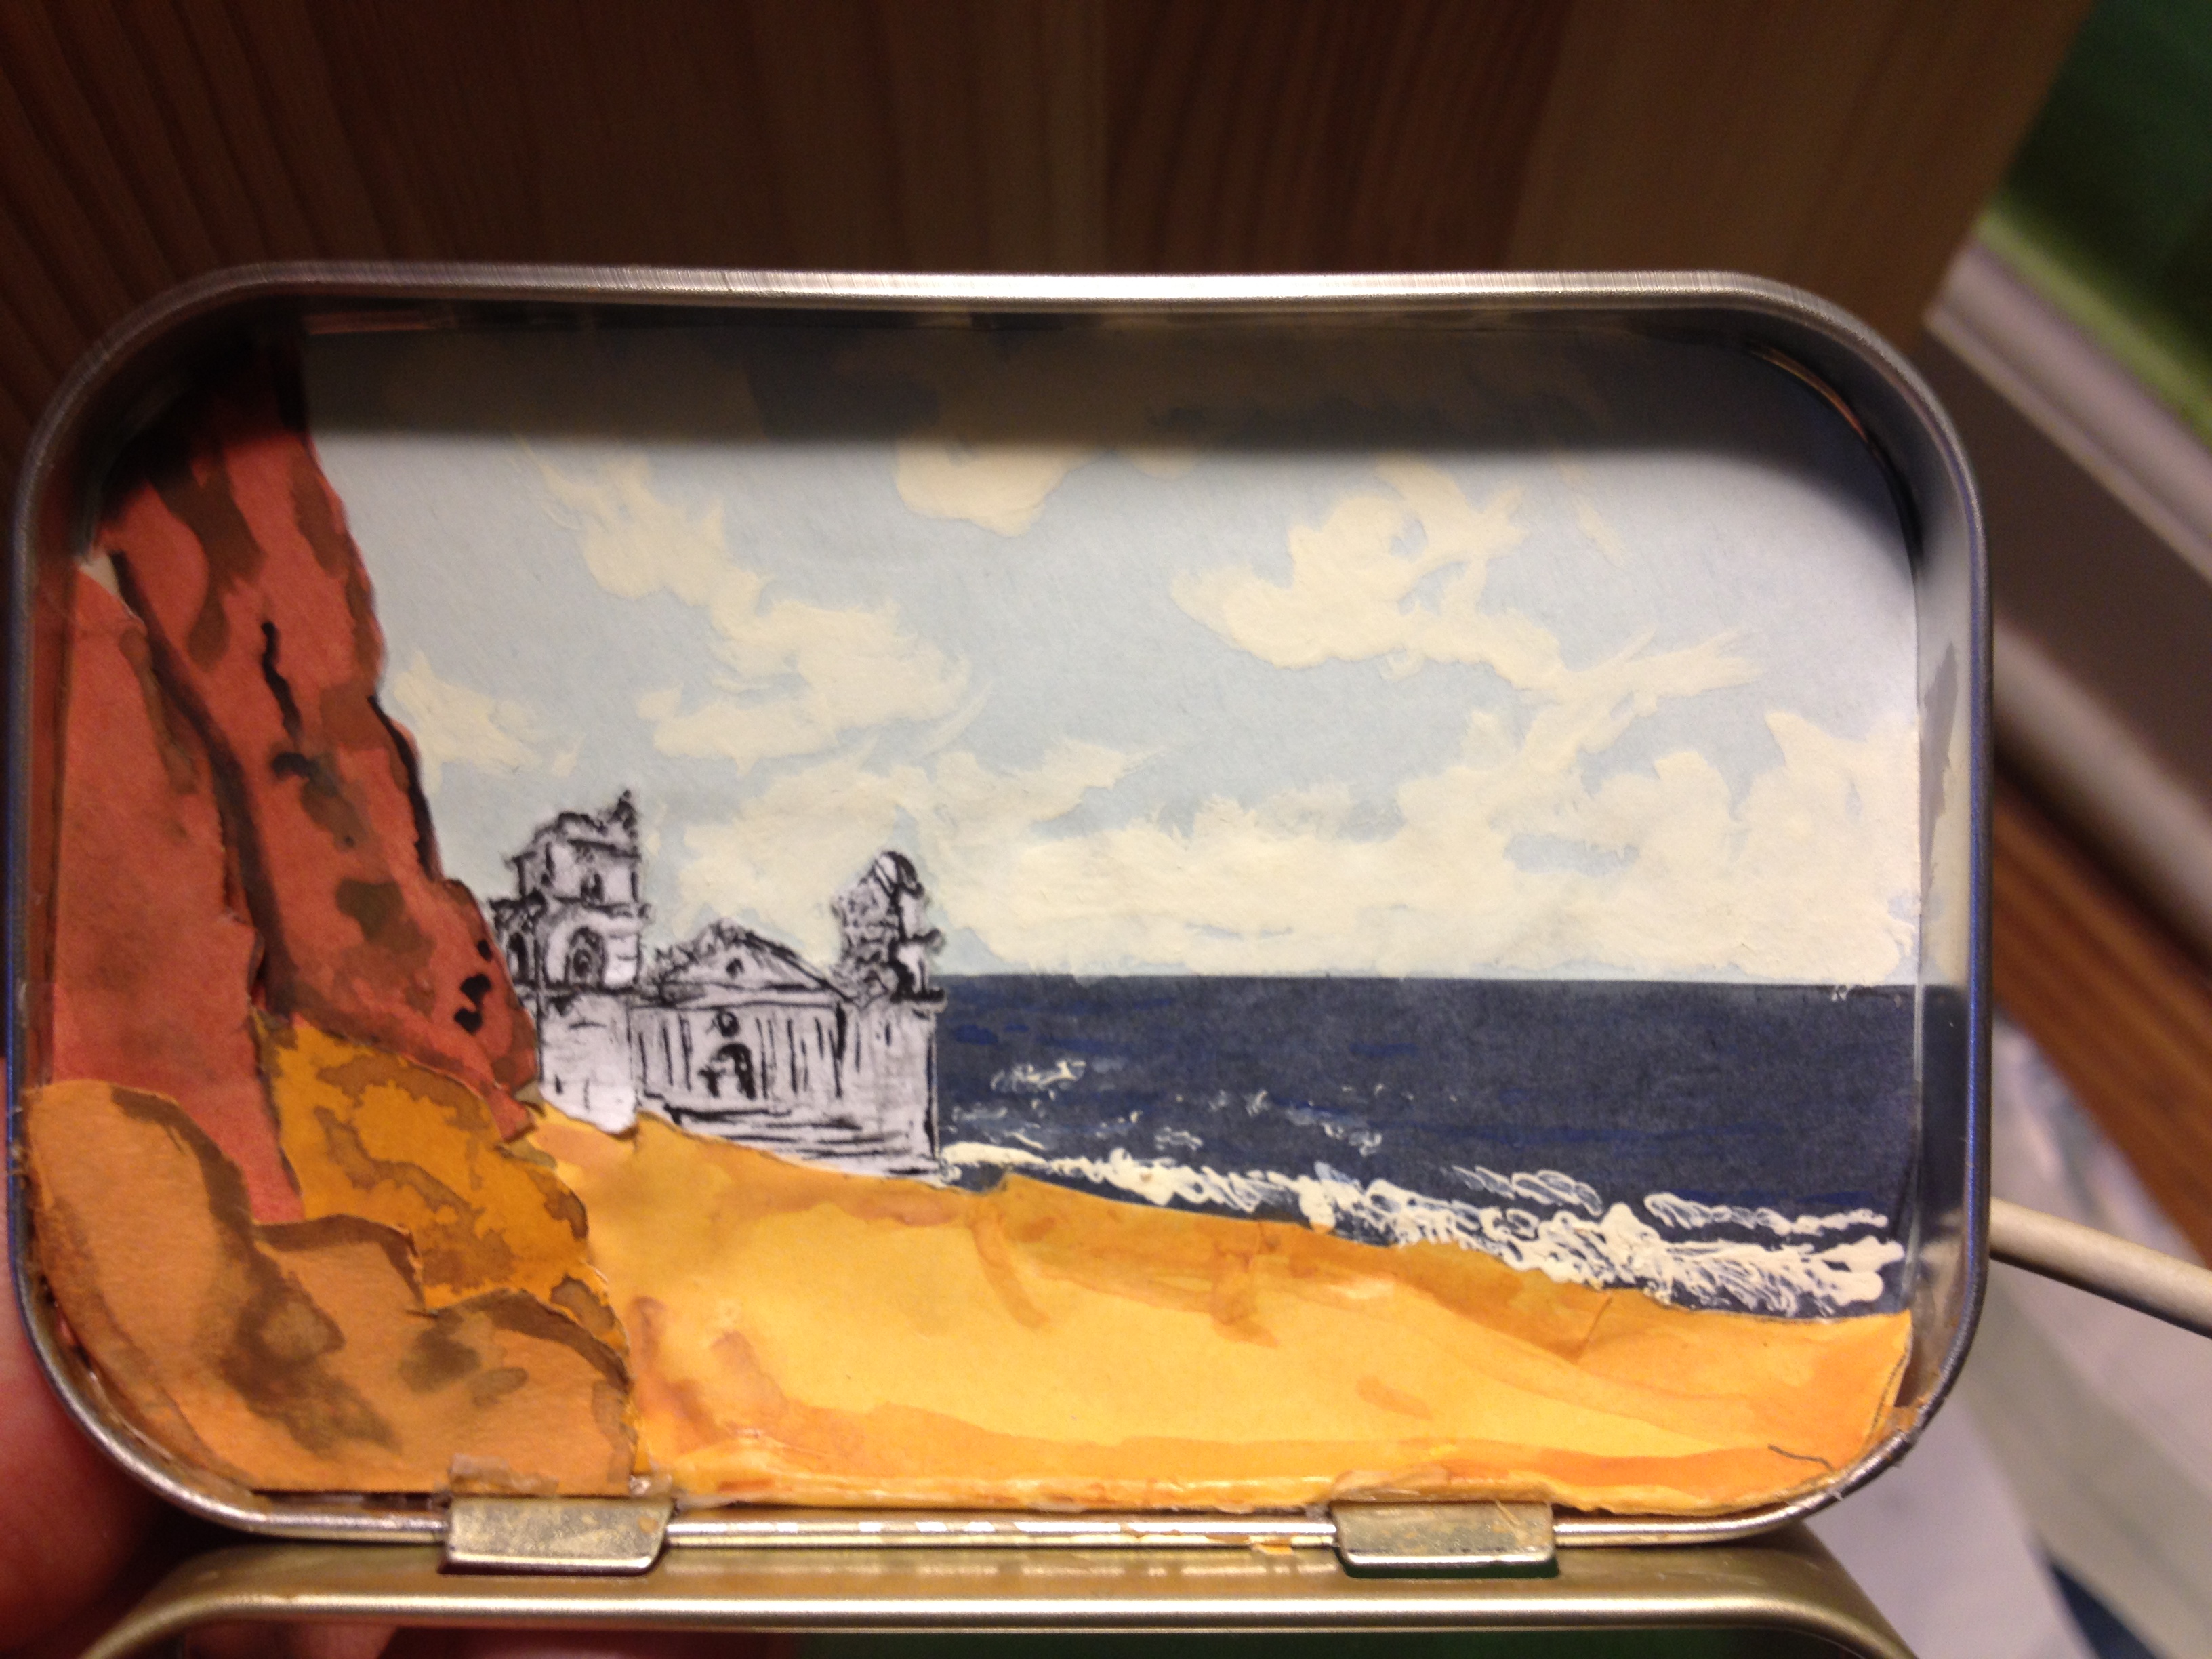 MYSTERIOUS...a palace is lapped by waves on a rocky coast in this dream box